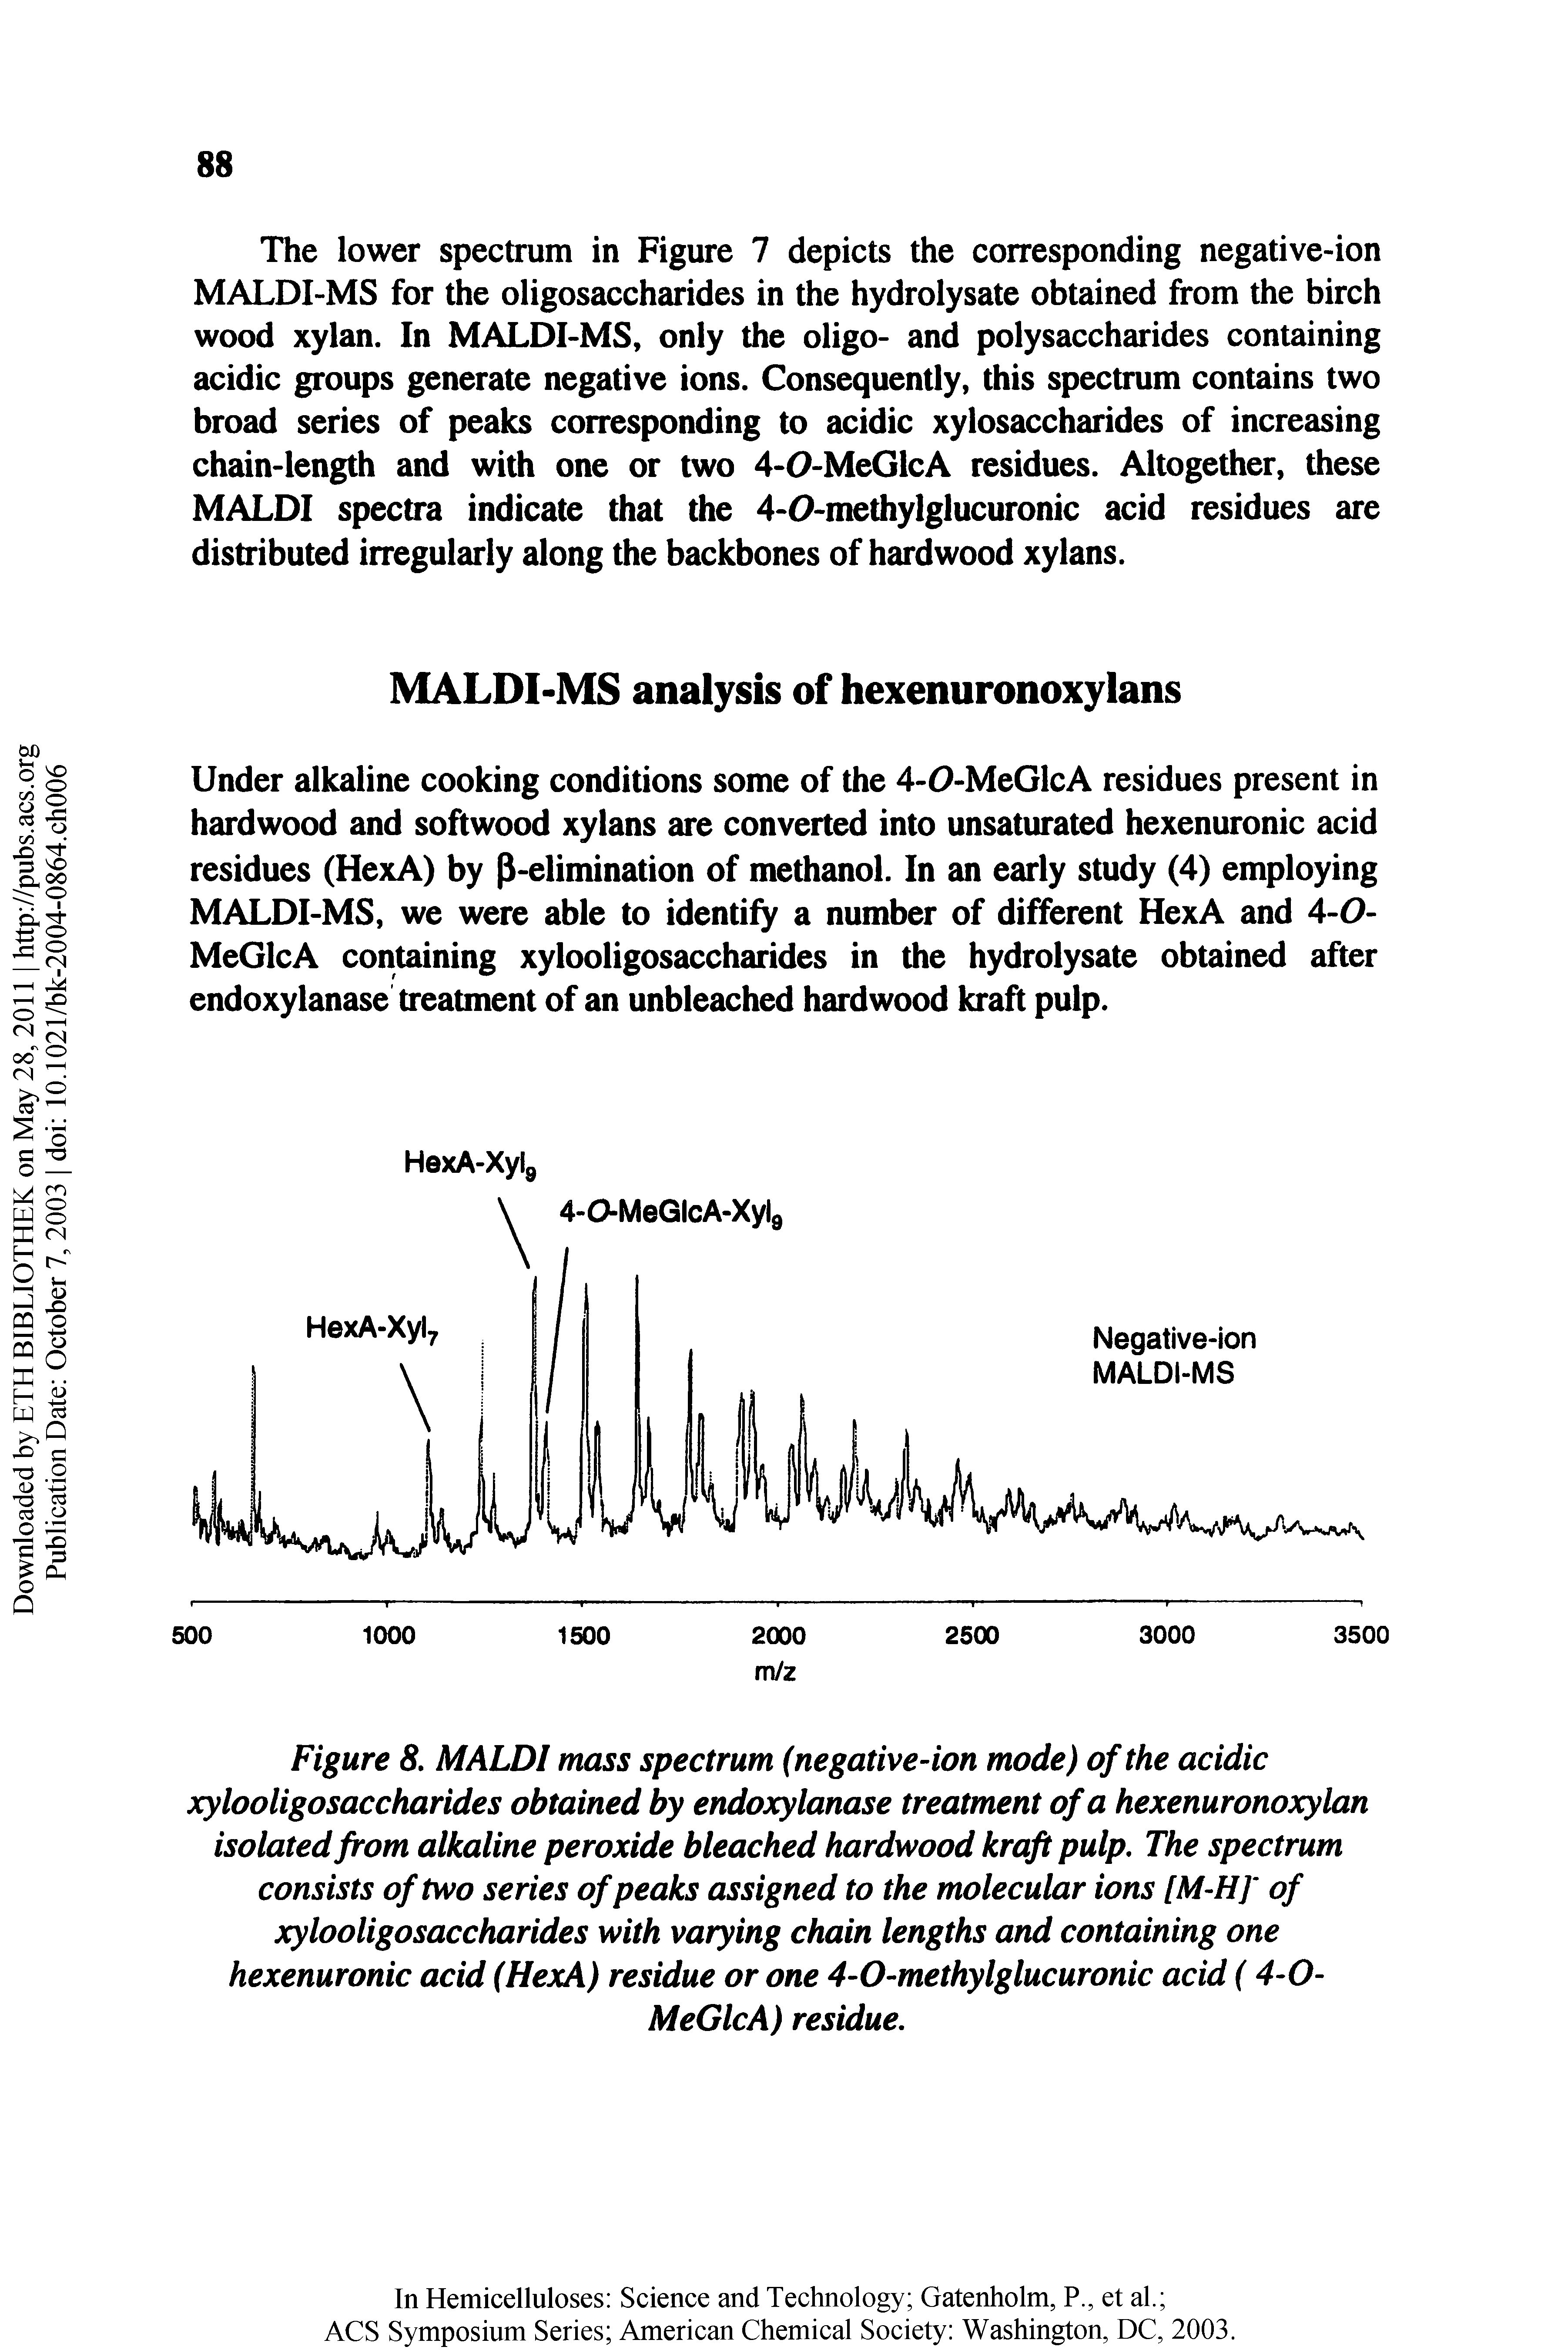 Figure 8, MALDI mass spectrum (negative-ion mode) of the acidic xylooligosaccharides obtained by endoxylanase treatment of a hexenuronoxylan isolated from alkaline peroxide bleached hardwood kraft pulp. The spectrum consists of two series of peaks assigned to the molecular ions [M-Hf of xylooligosaccharides with varying chain lengths and containing one hexenuronic acid (HexA) residue or one 4-O-methylglucuronic acid ( 4-0-...